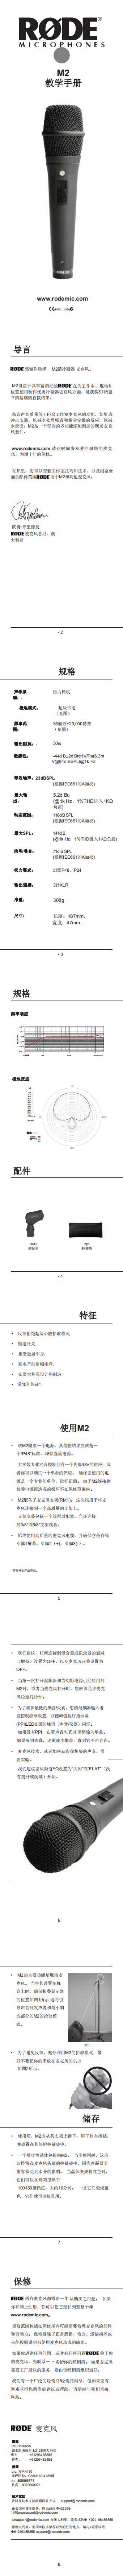 M2_product_manual_translate_Chinese_0.png